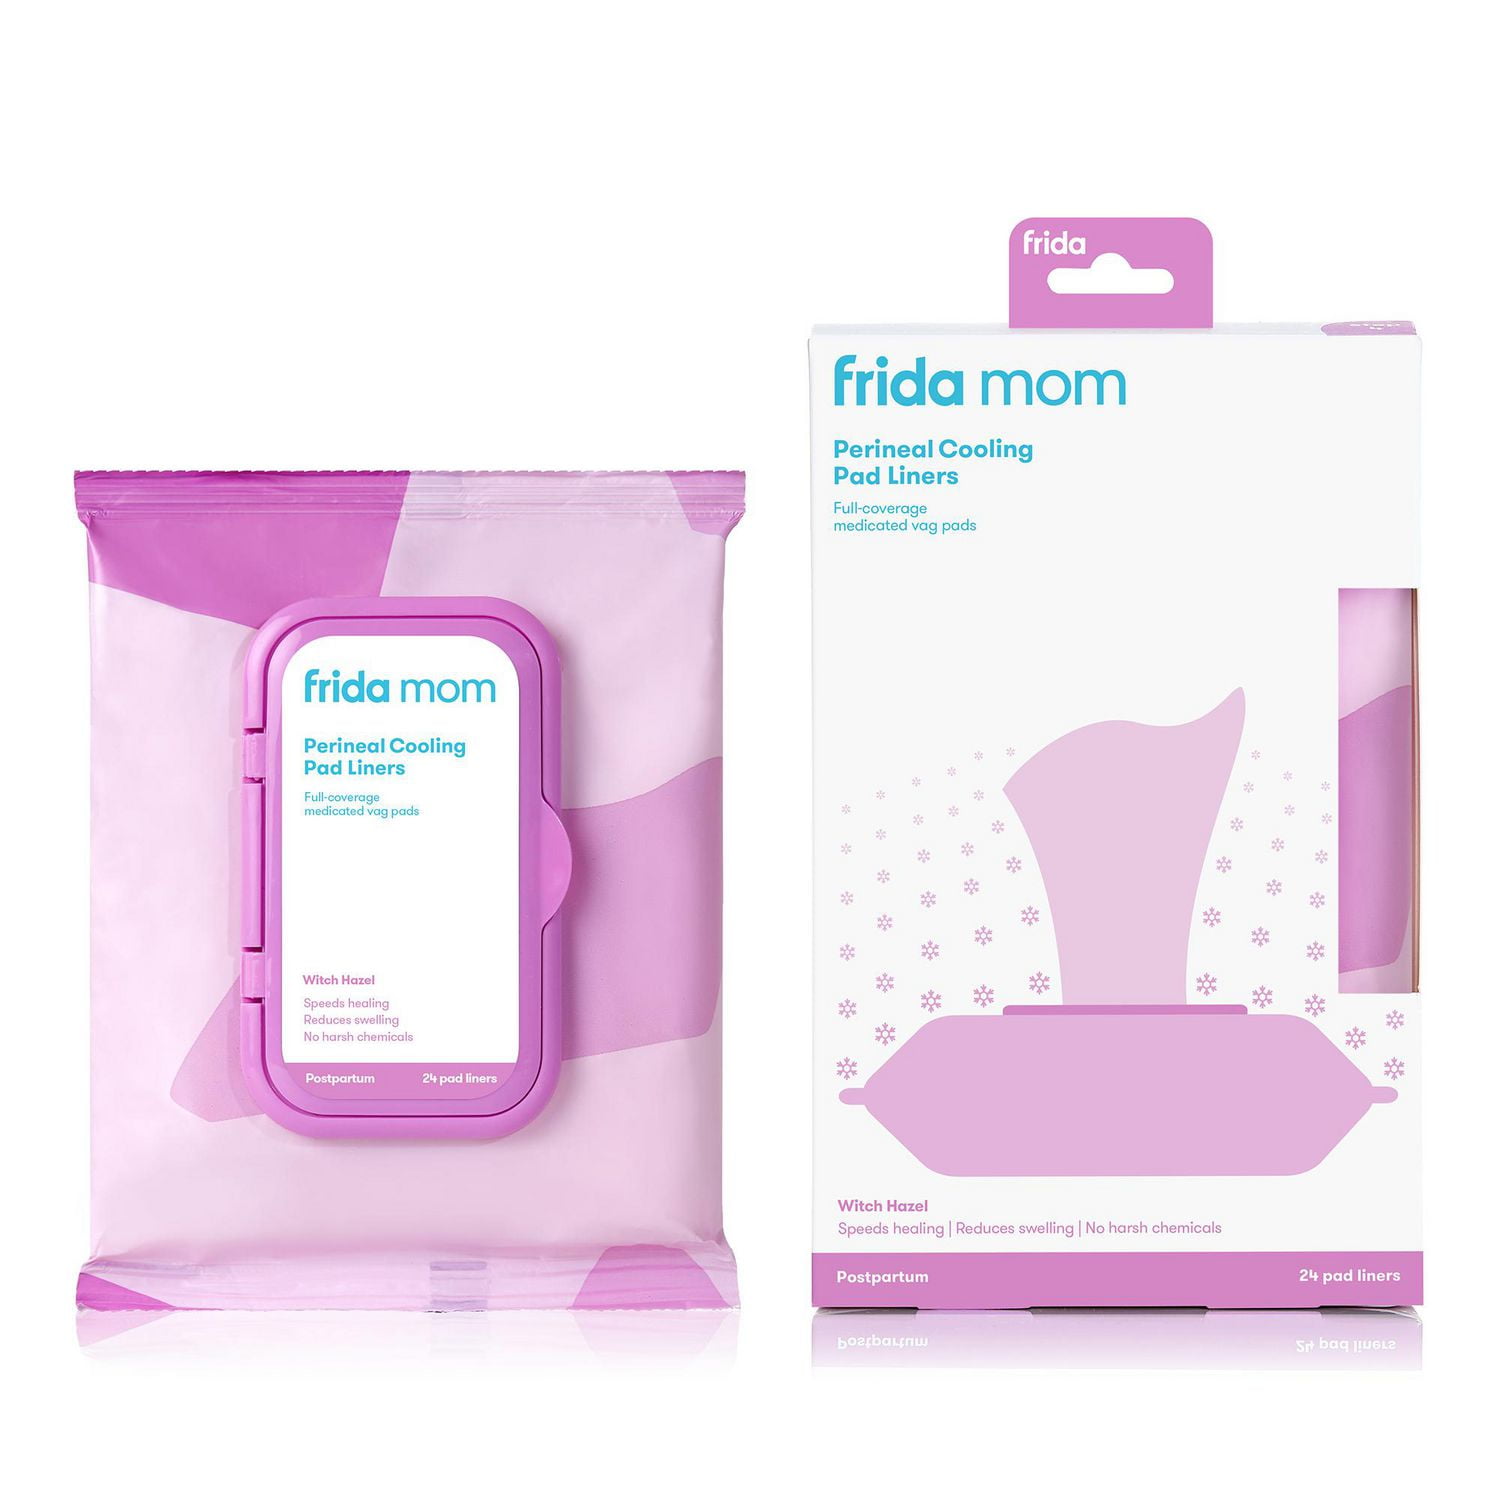 Newmom Disposable Maternity Pads (Maxi) - Pack Of 5 X 3